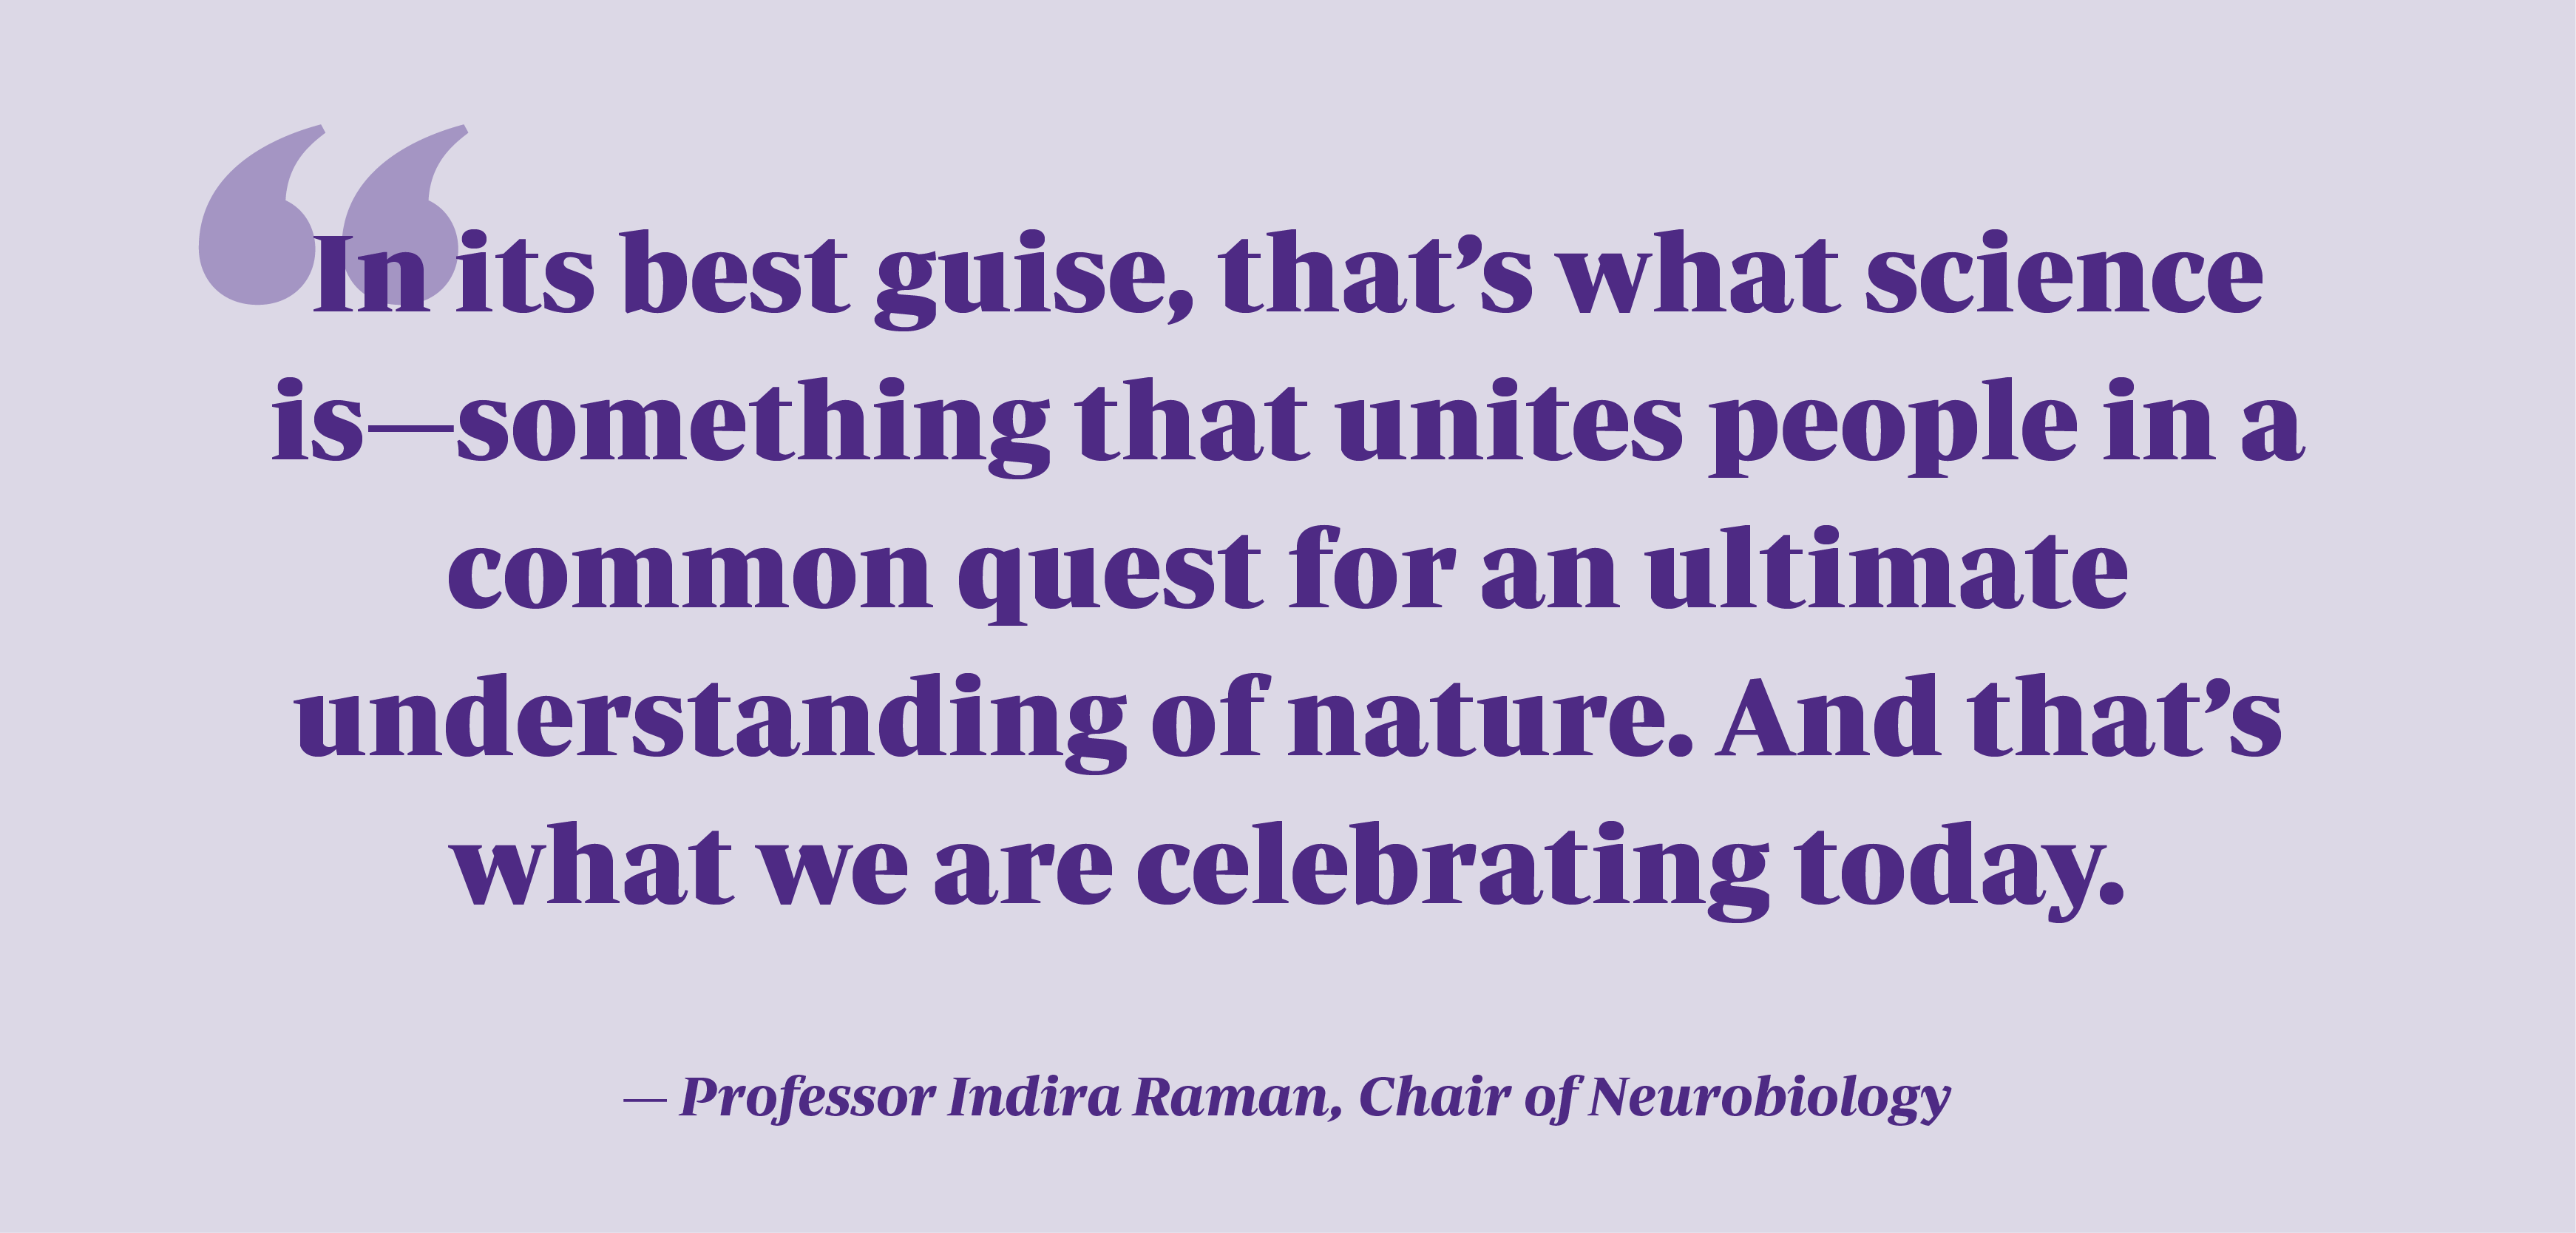 Purple quote on light purple background reads "In its best guise, that’s what science is—something that unites people in a common quest for an ultimate understanding of nature. And that’s what we are celebrating today."